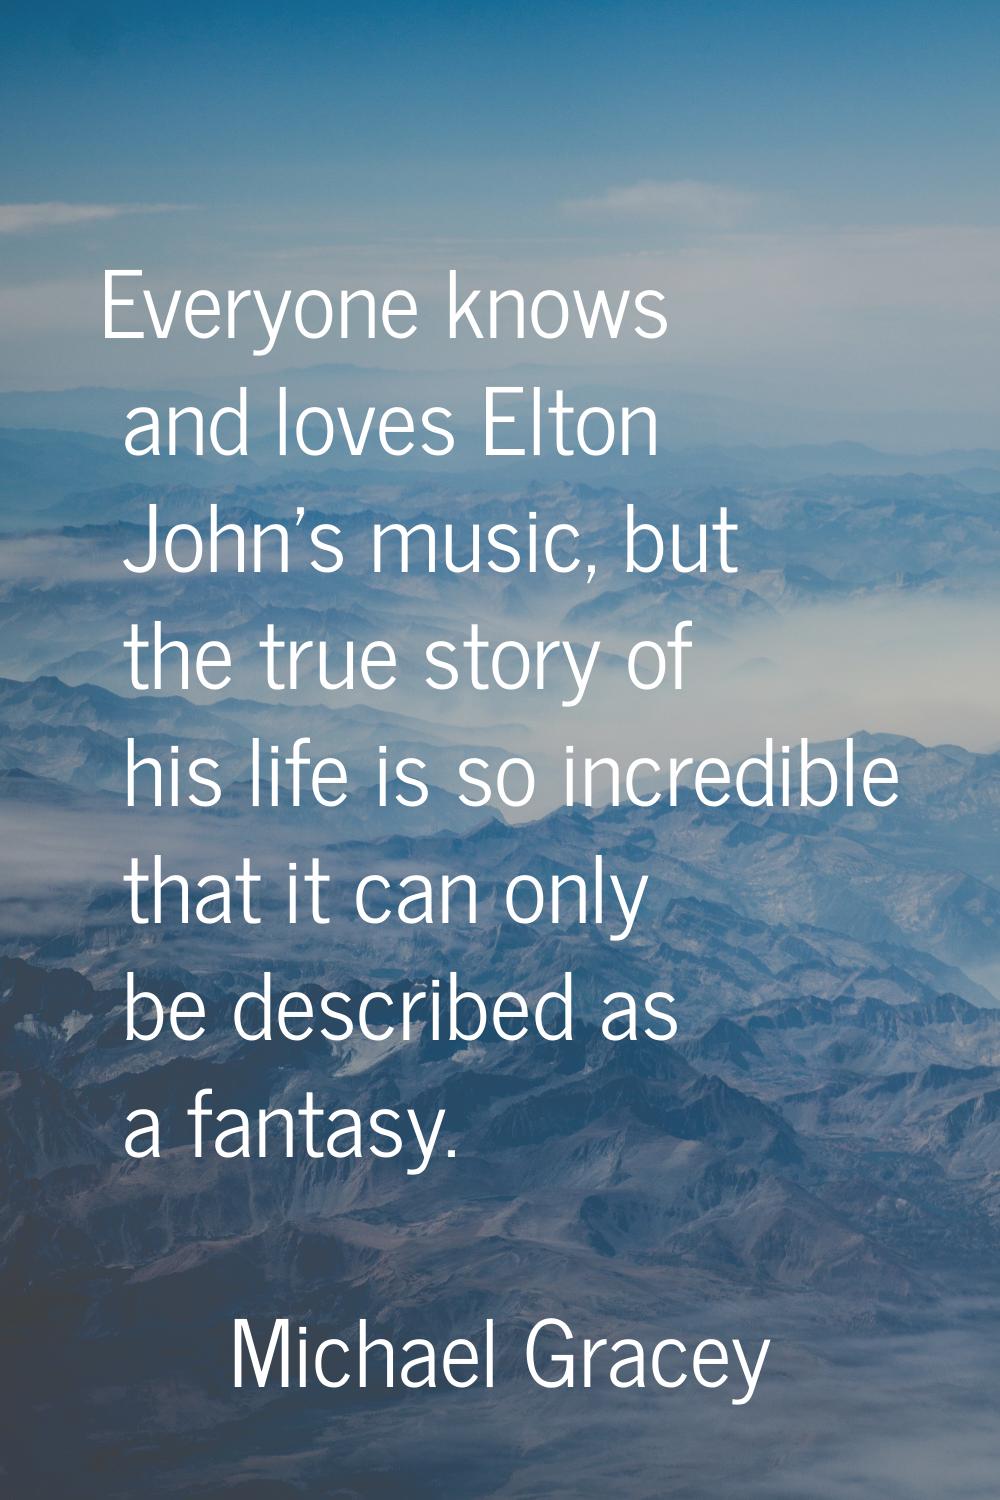 Everyone knows and loves Elton John's music, but the true story of his life is so incredible that i